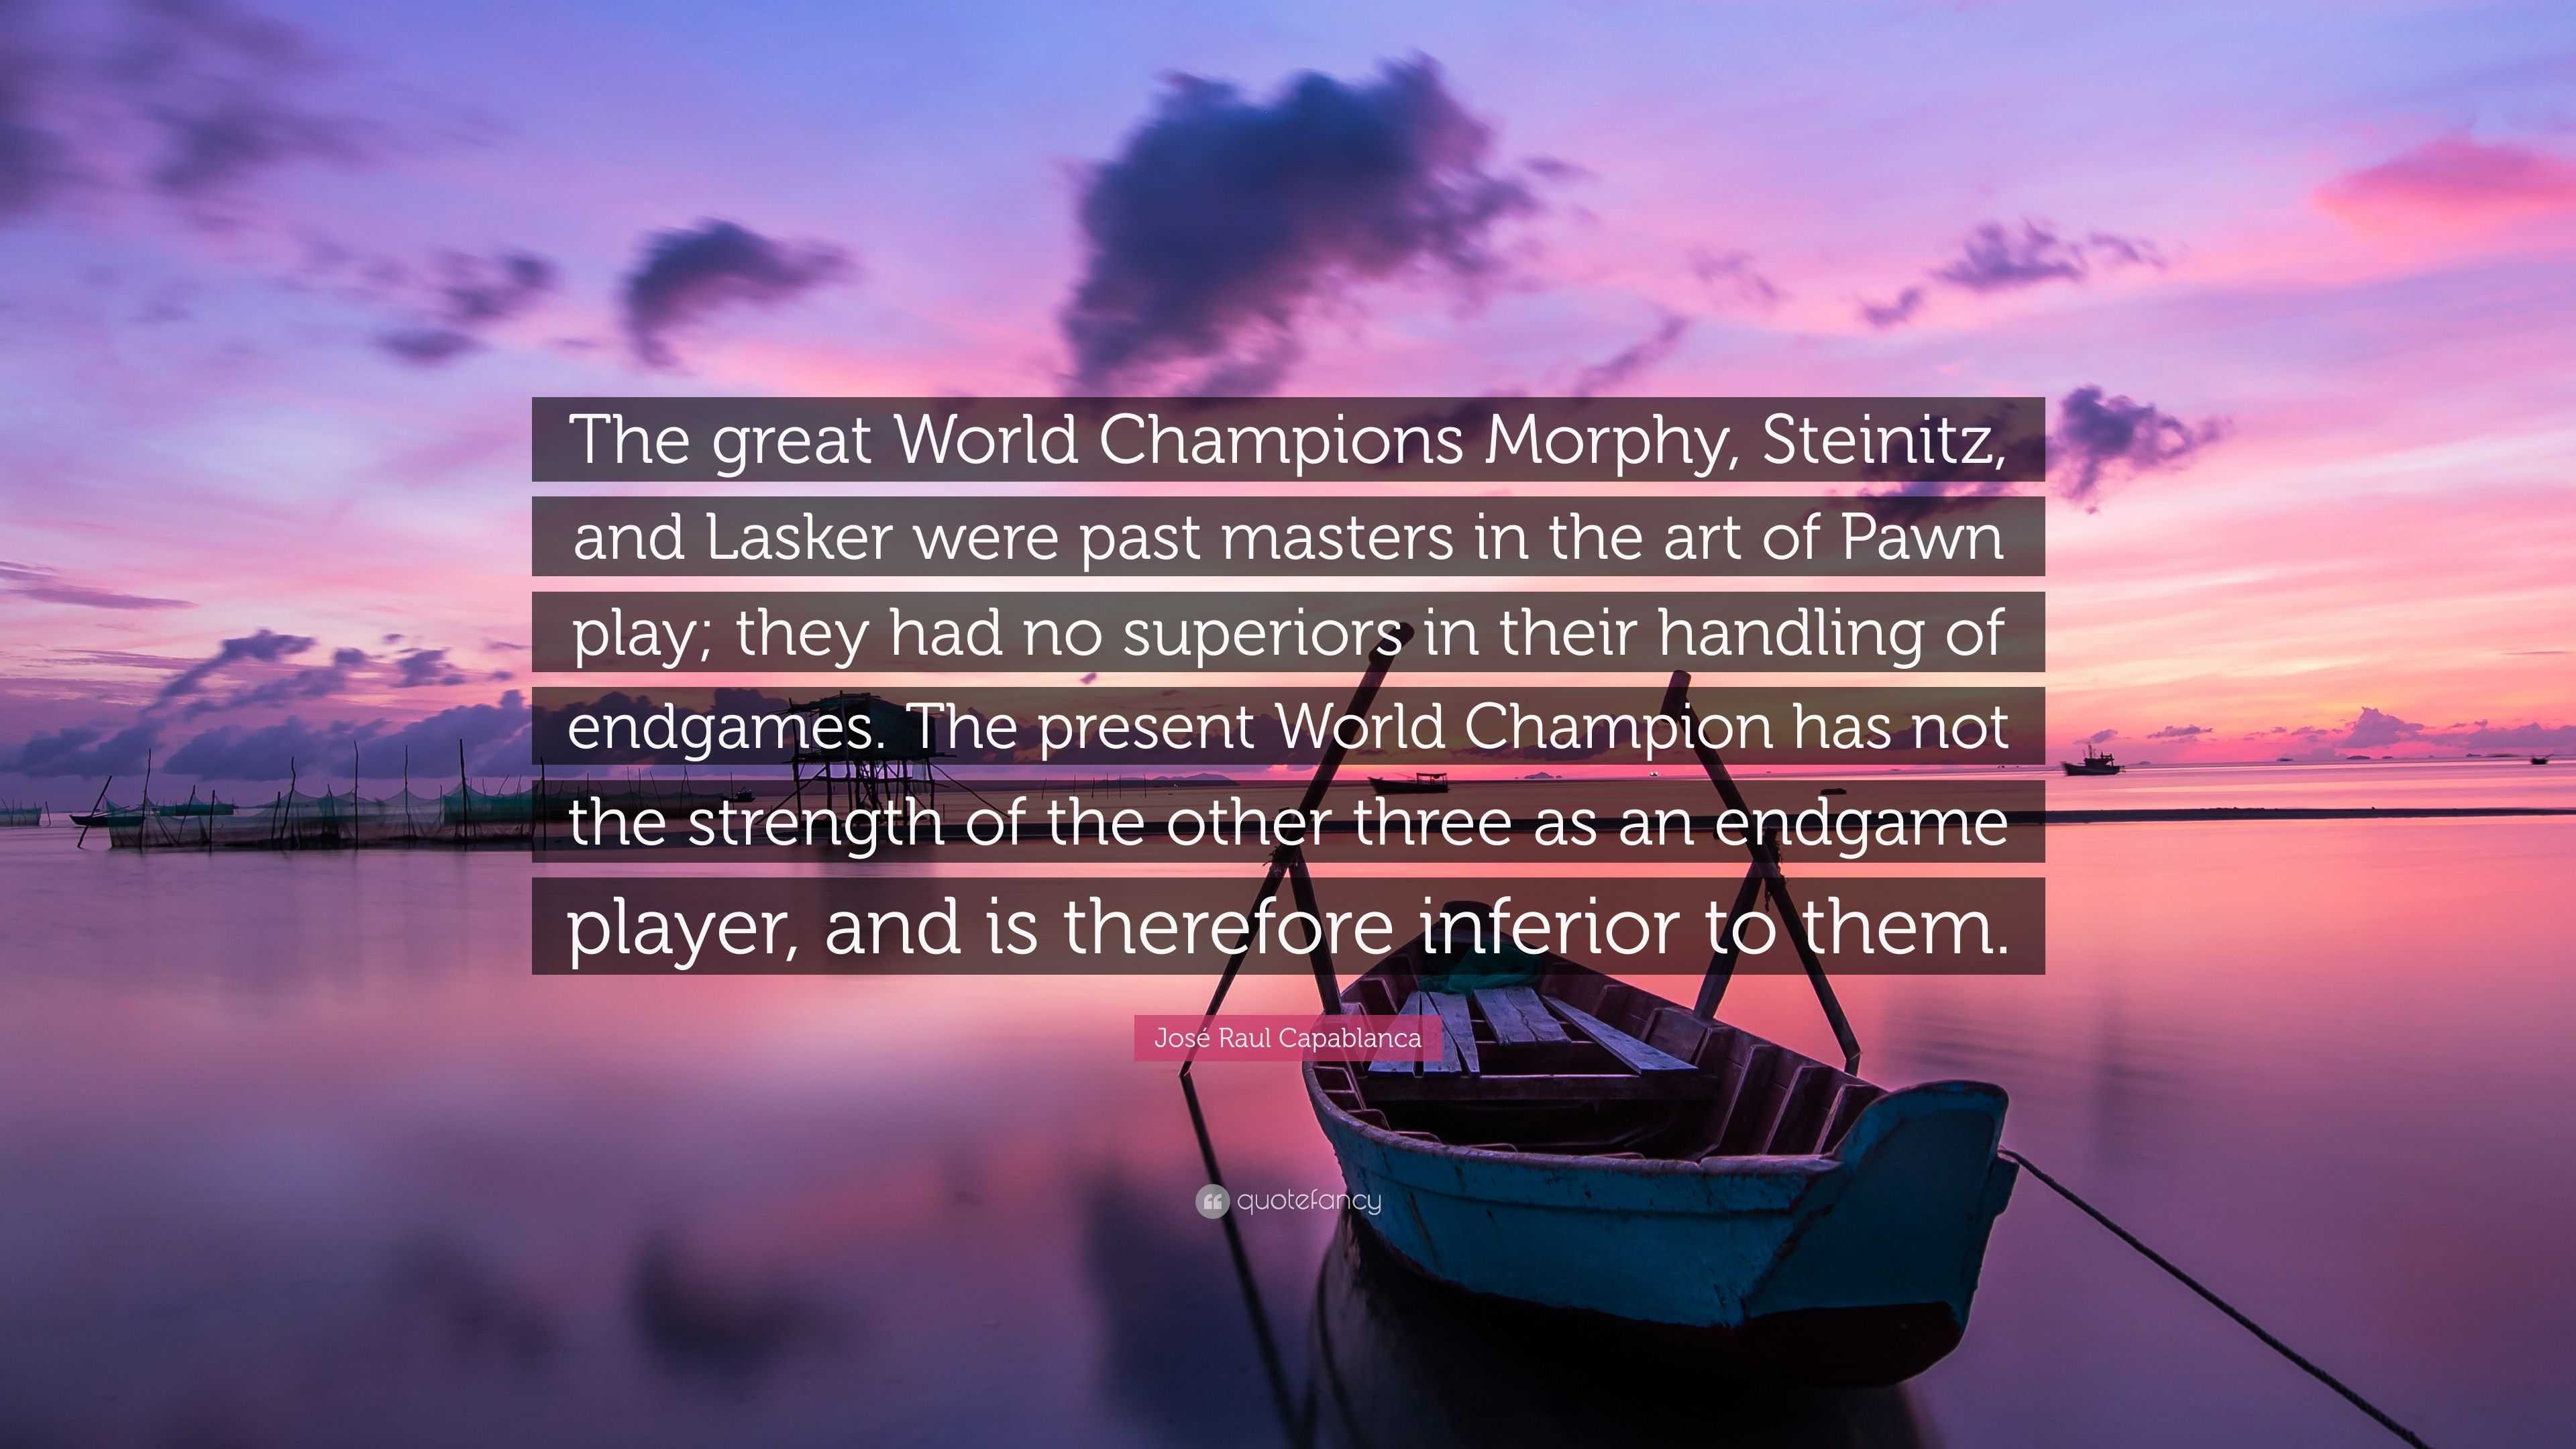 Endgames of the World Champions